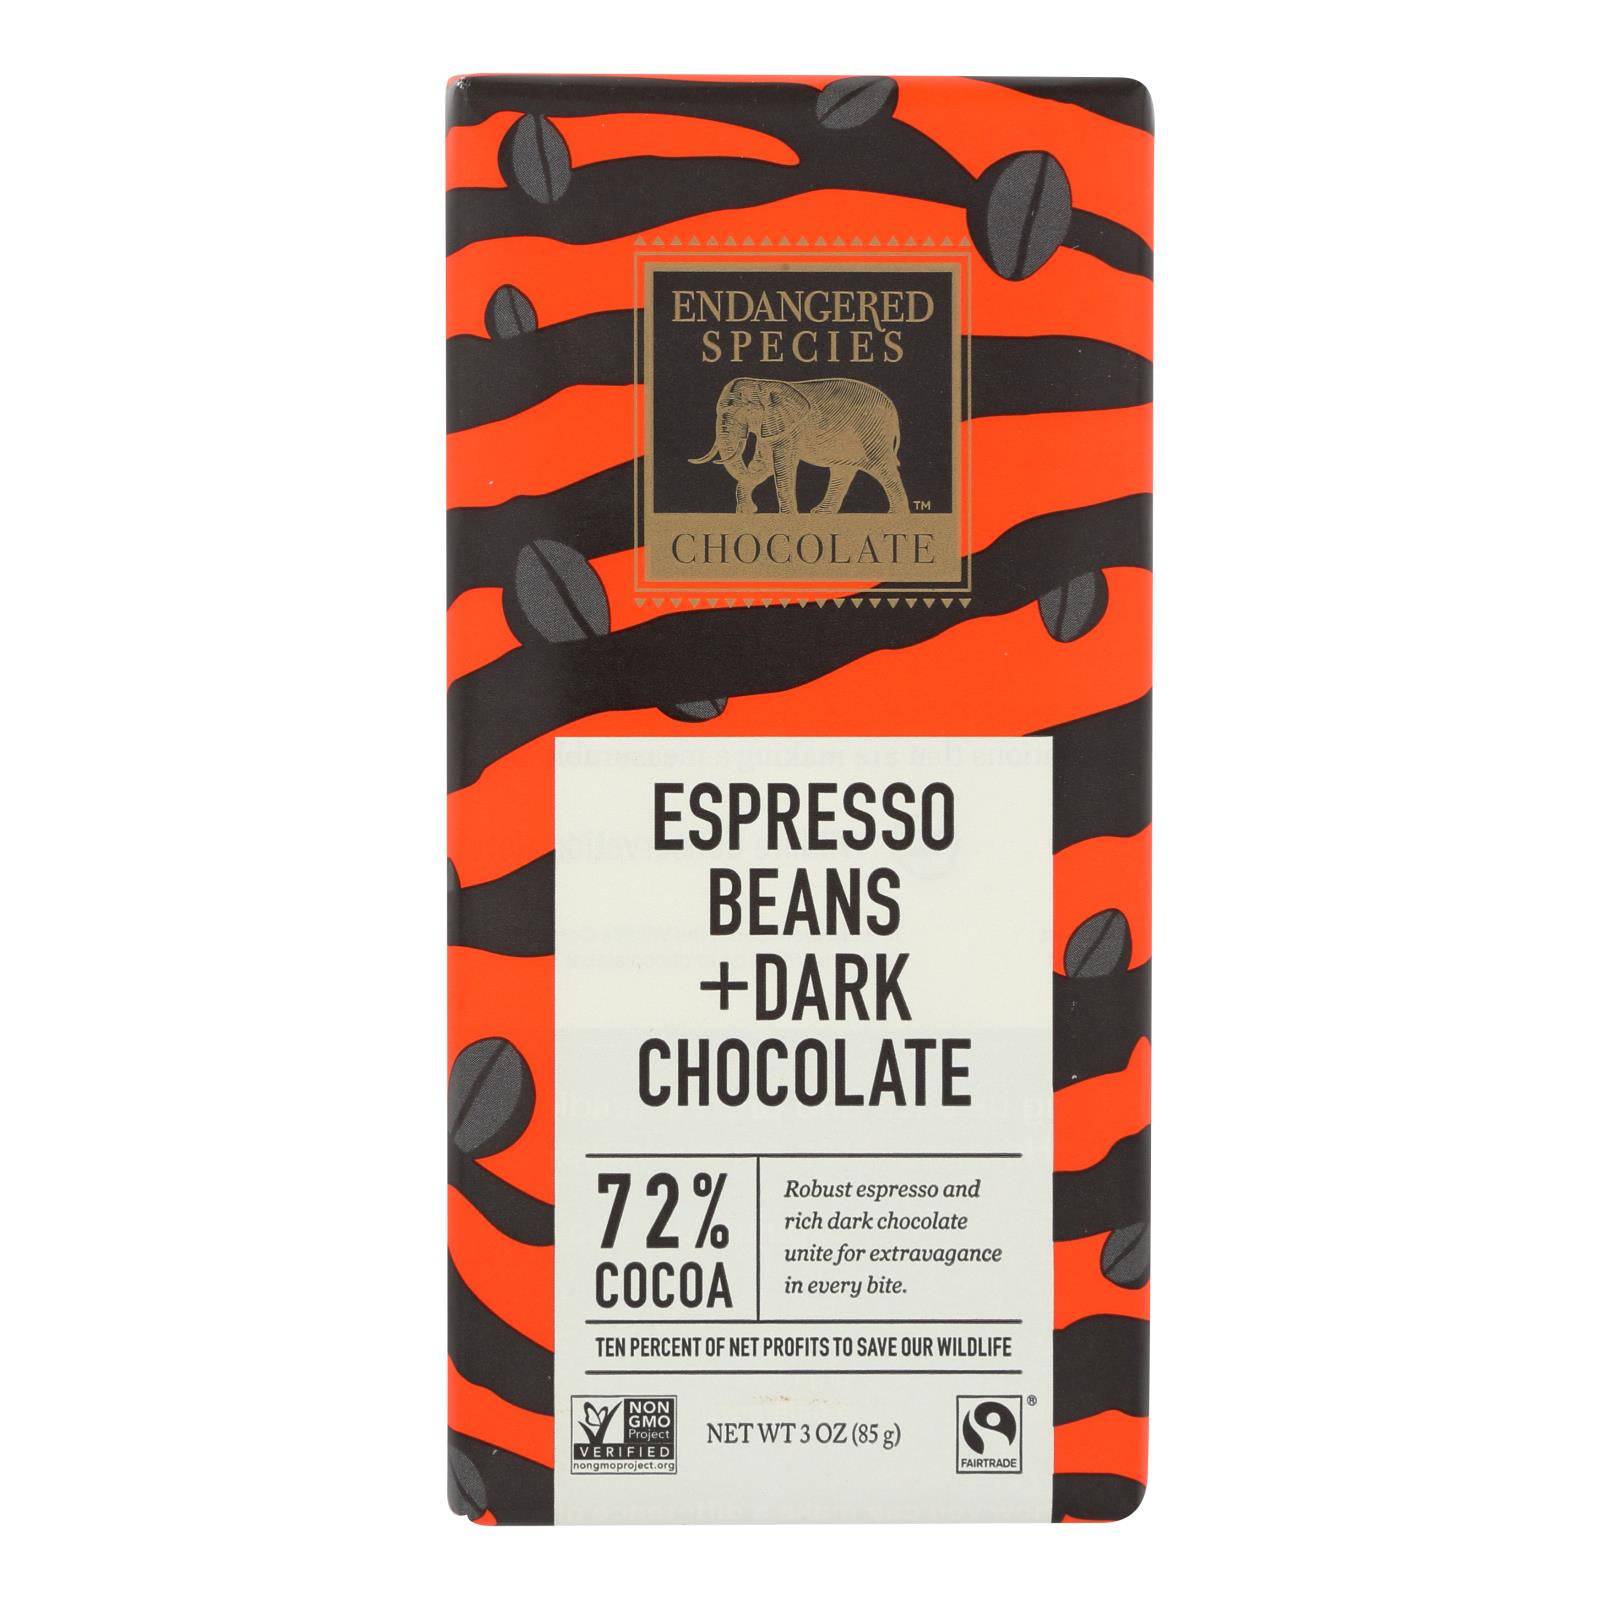 Buy Endangered Species Natural Chocolate Bars - Dark Chocolate - 72 Percent Cocoa - Espresso Beans - 3 Oz Bars - Case Of 12  at OnlyNaturals.us